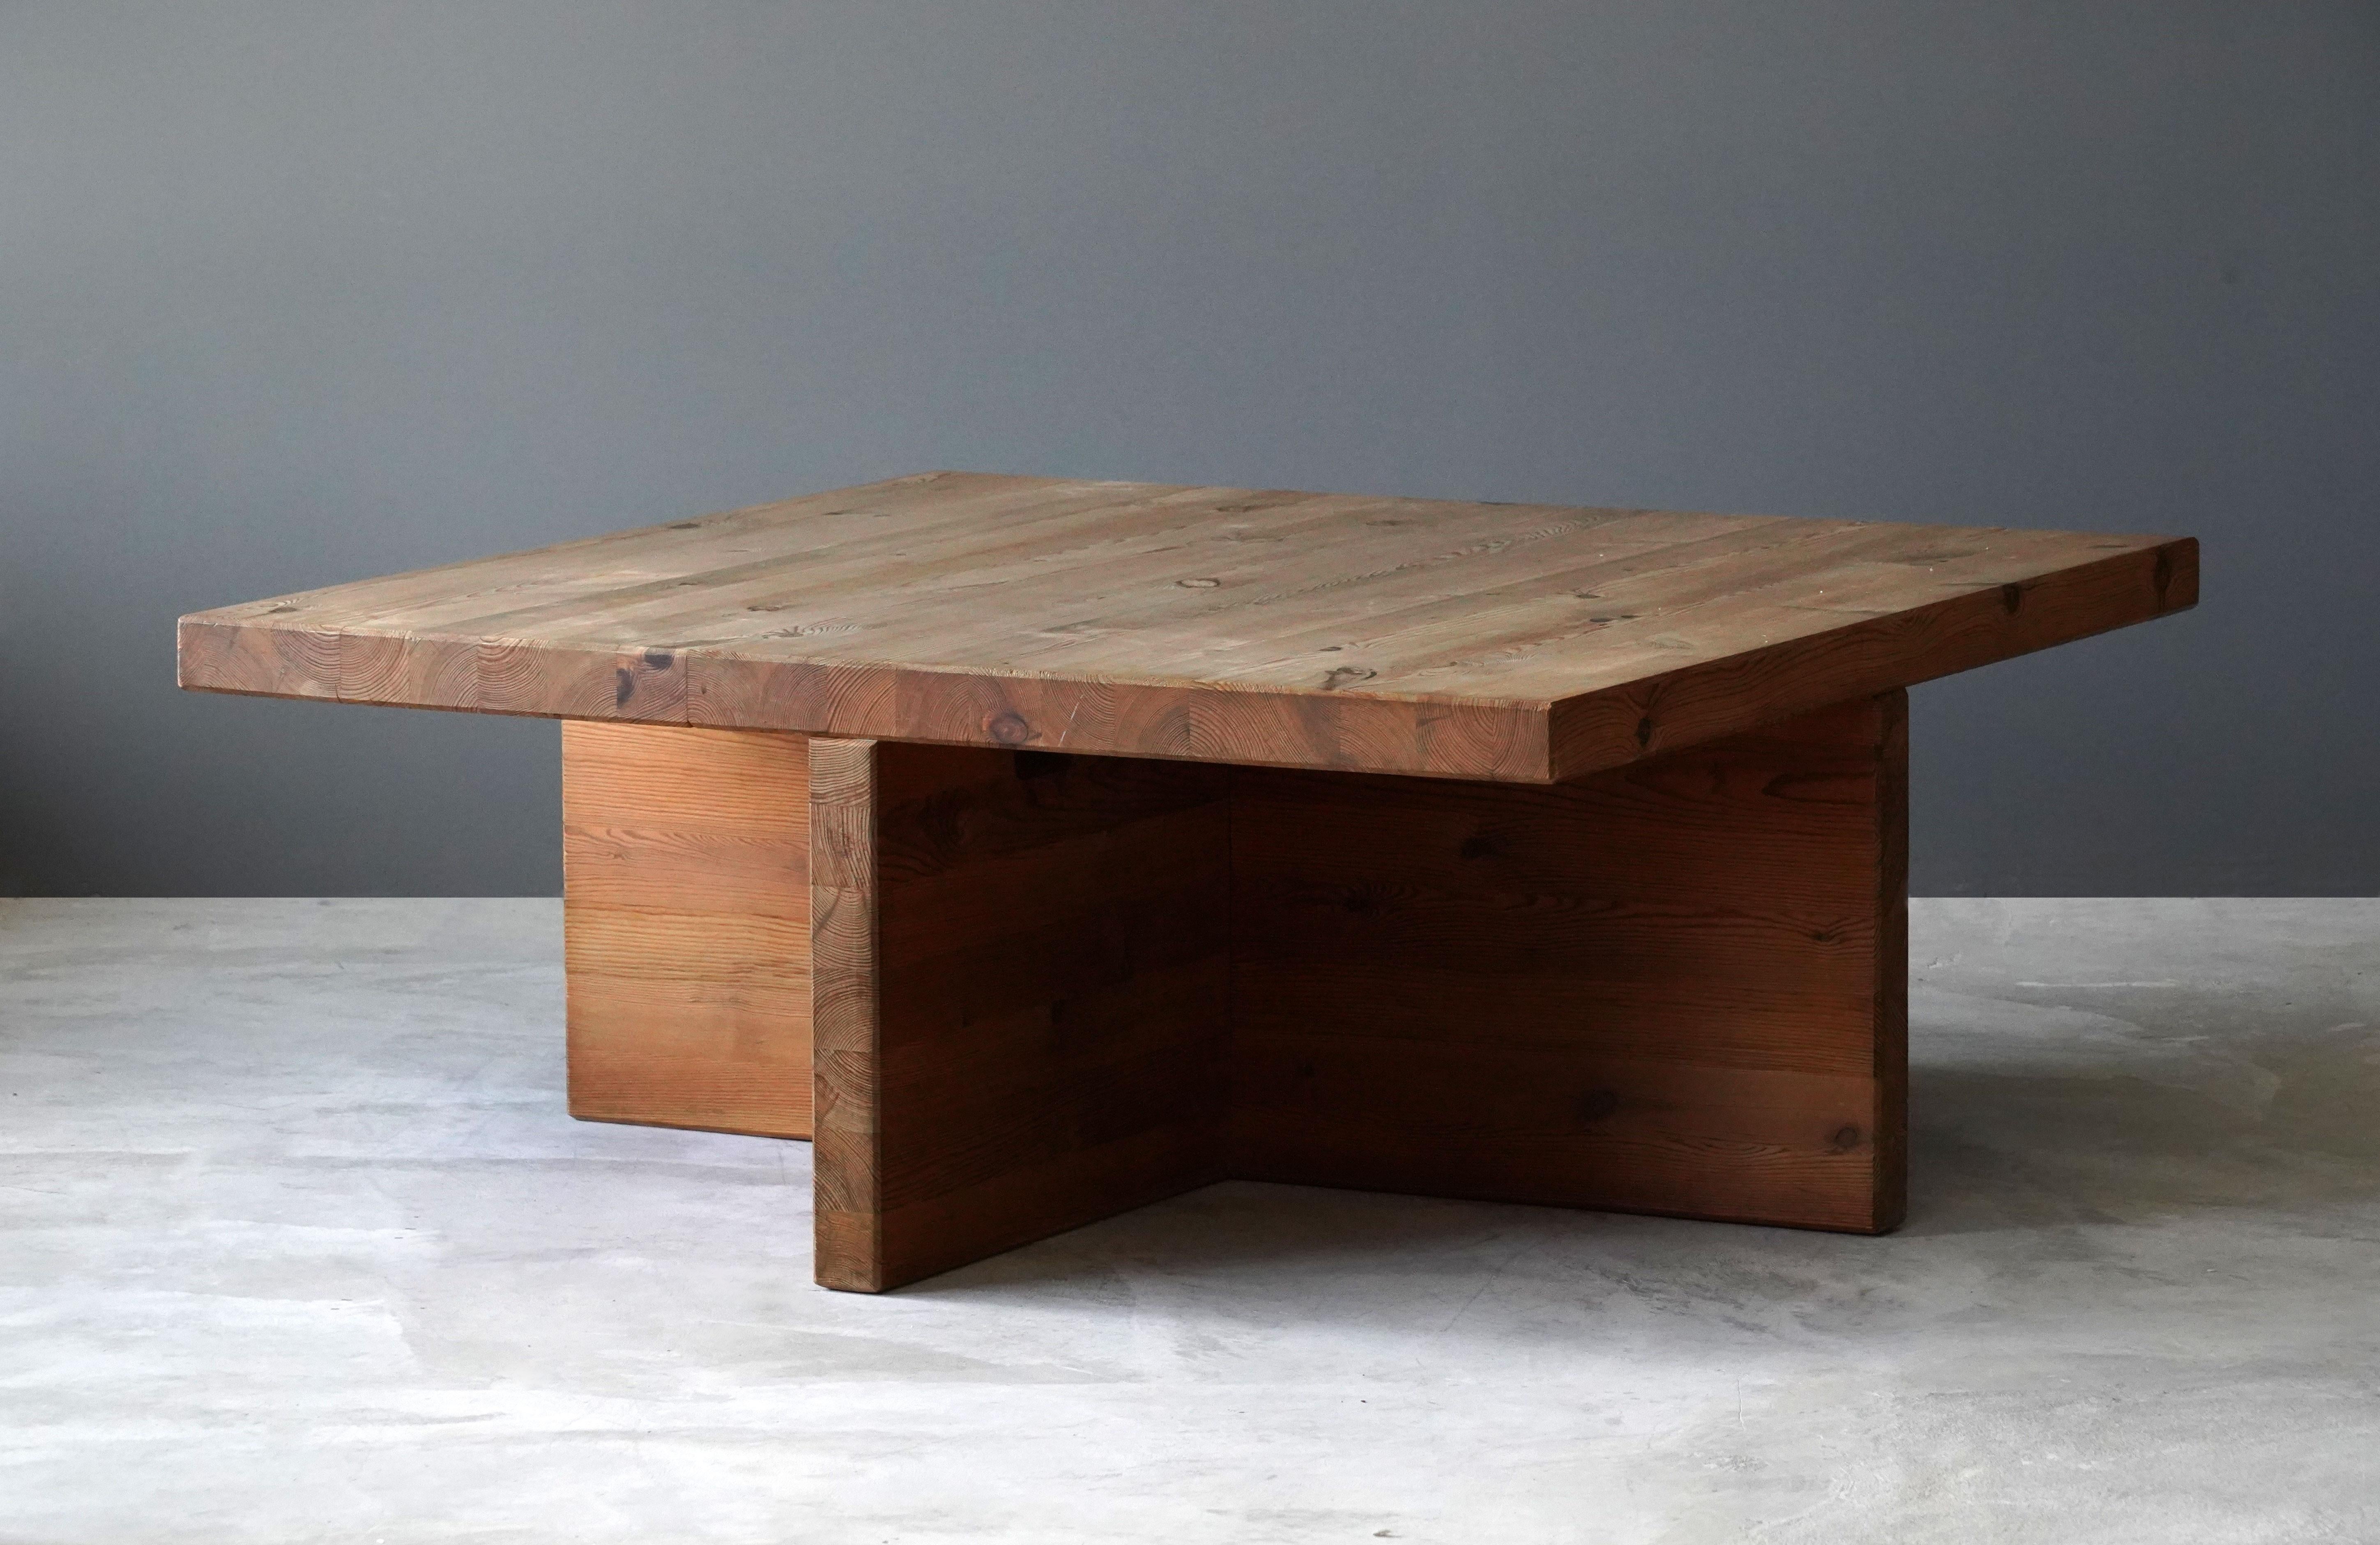 A large modernist coffee table, executed in massive pine. Designed and executed in Sweden, circa 1970s. The purity of the form enhances the natural beauty of the material.

Other designers working in similar style include Roland Wilhelmsson, Axel